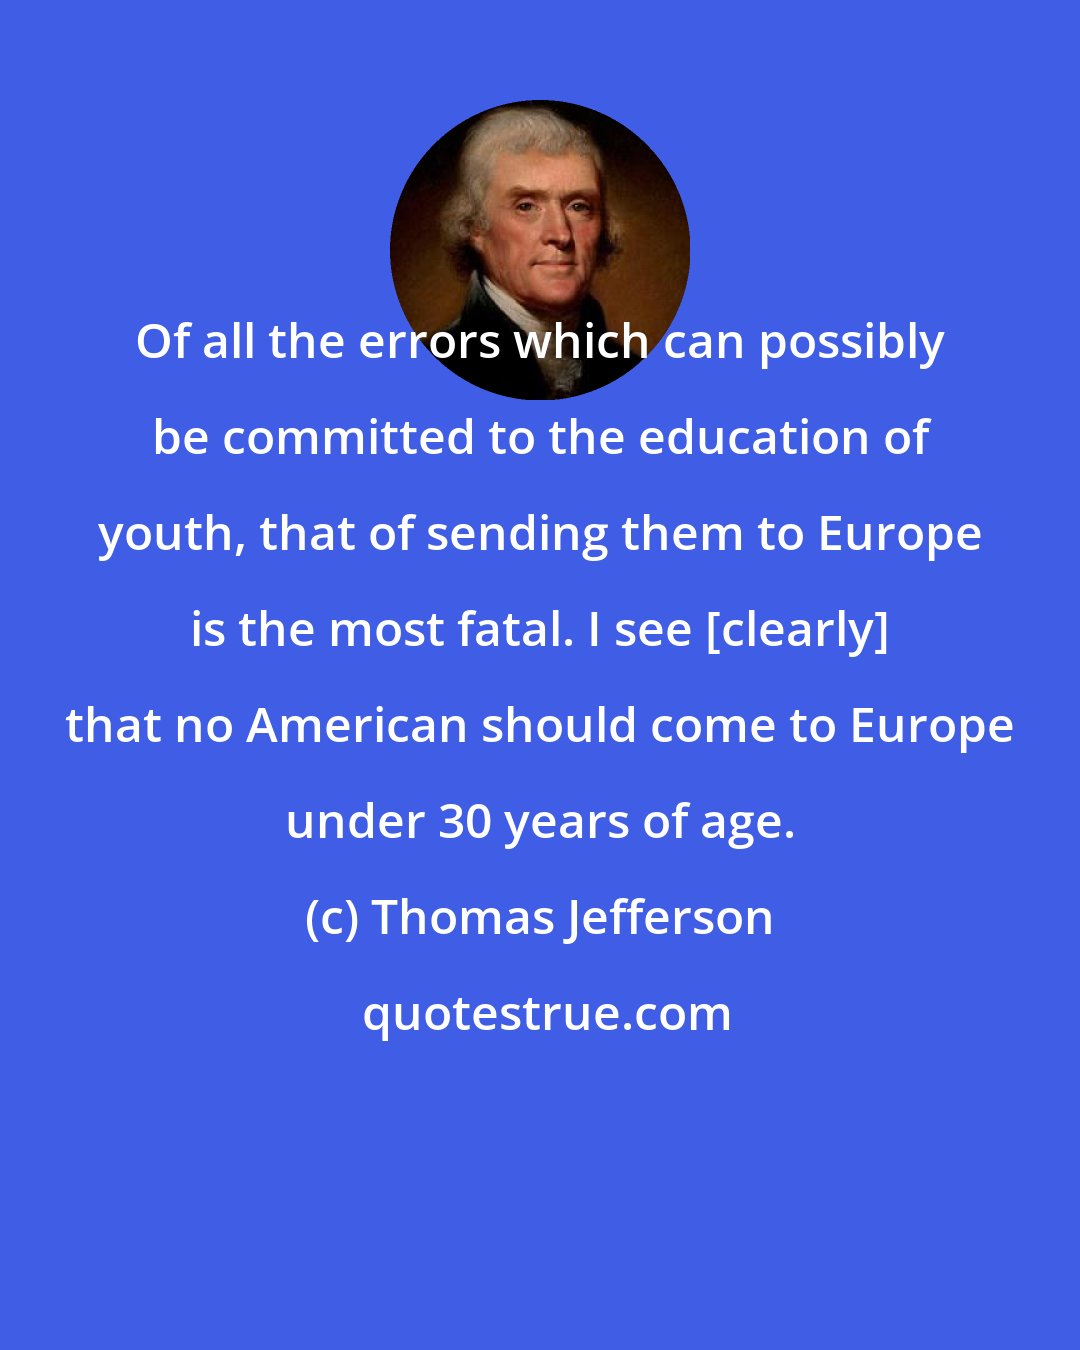 Thomas Jefferson: Of all the errors which can possibly be committed to the education of youth, that of sending them to Europe is the most fatal. I see [clearly] that no American should come to Europe under 30 years of age.